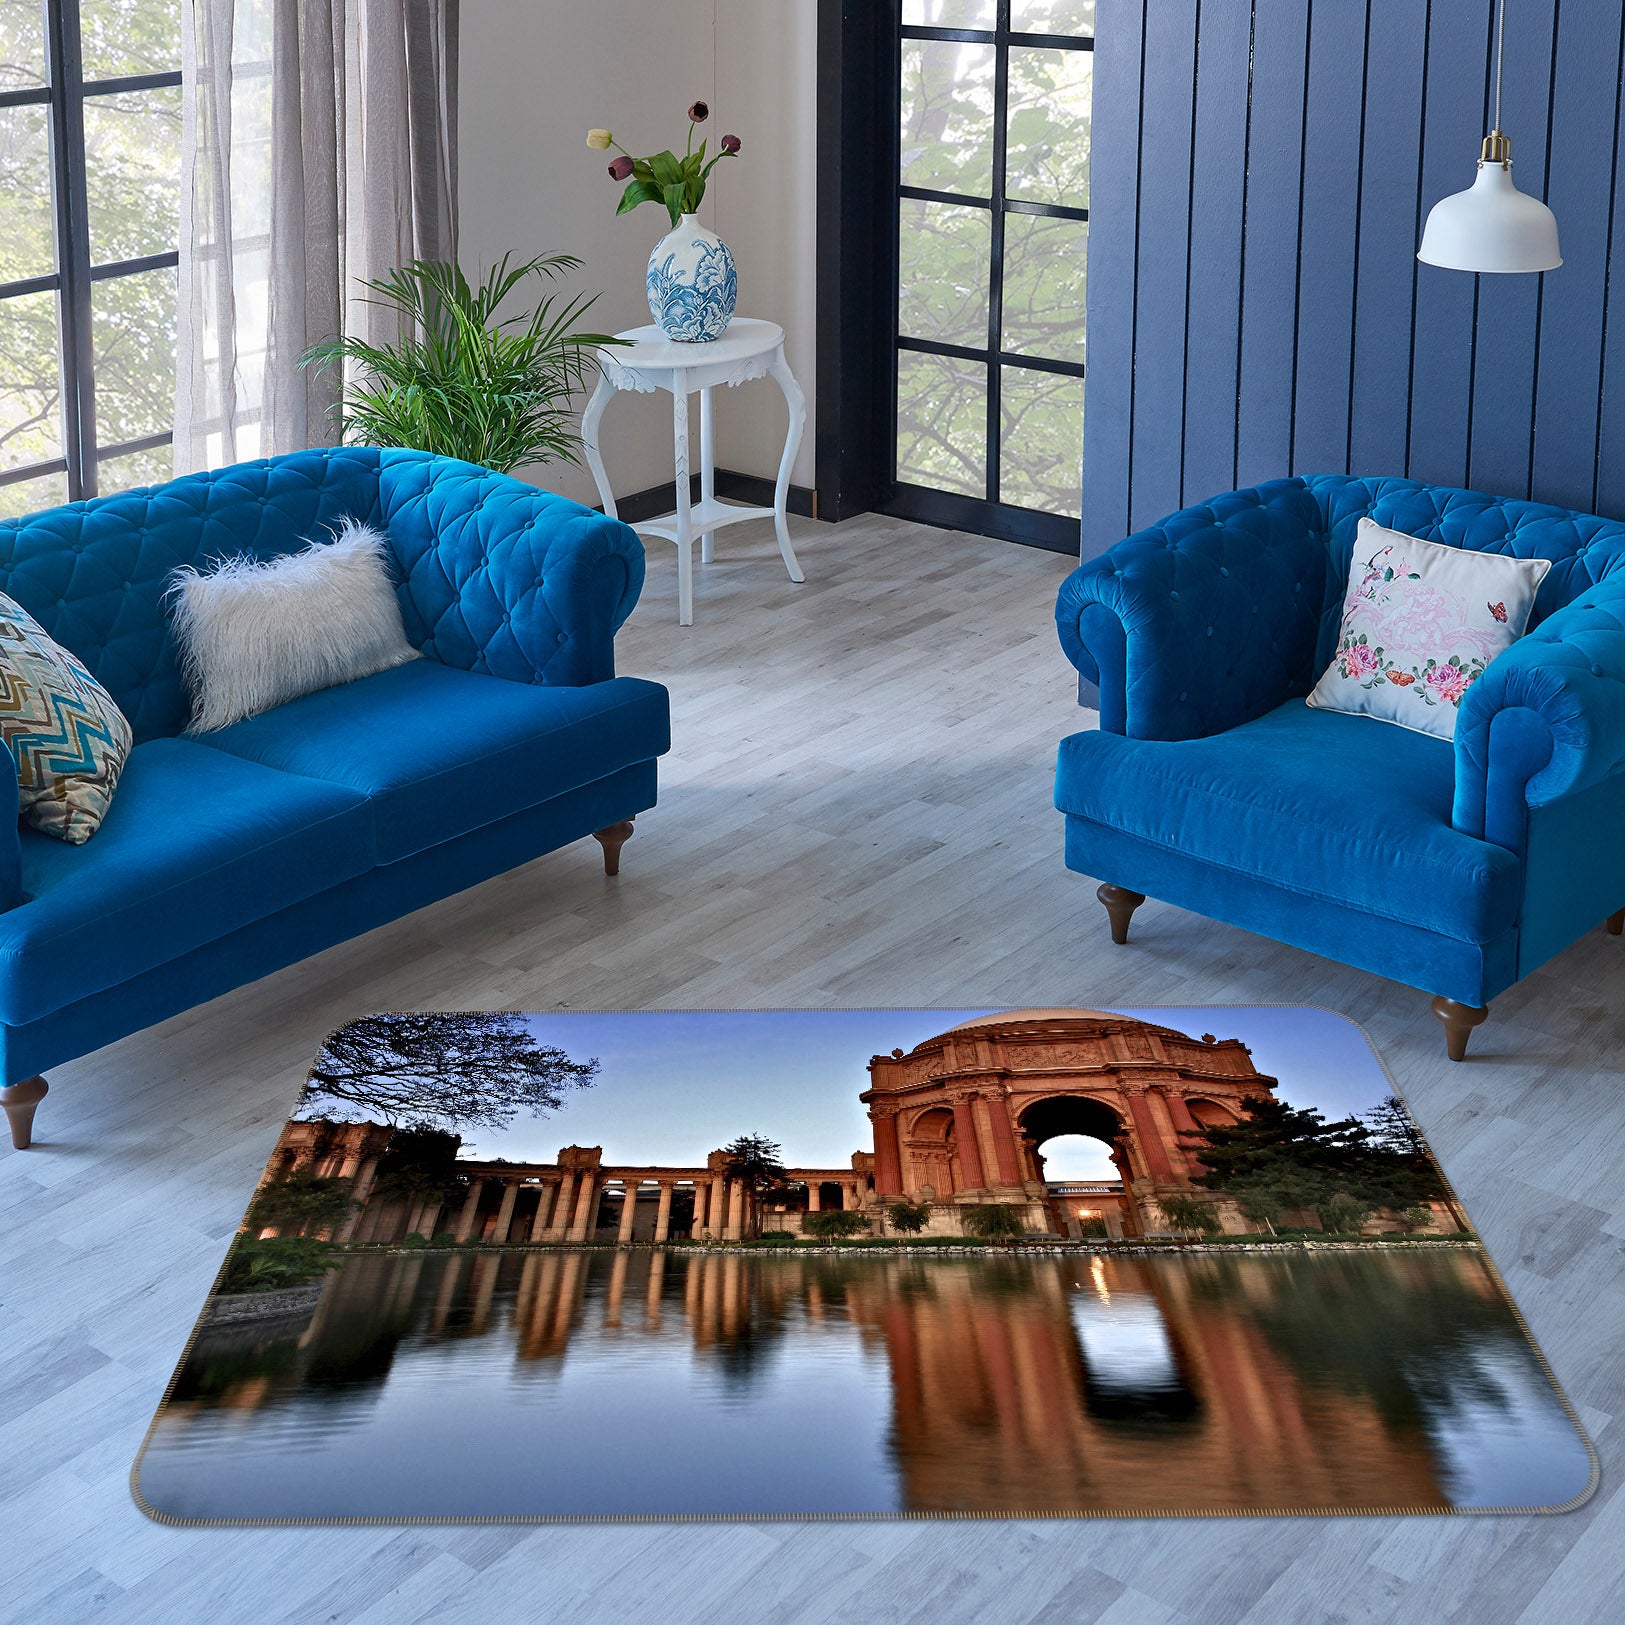 3D Reflection On Water Surface 84078 Kathy Barefield Rug Non Slip Rug Mat